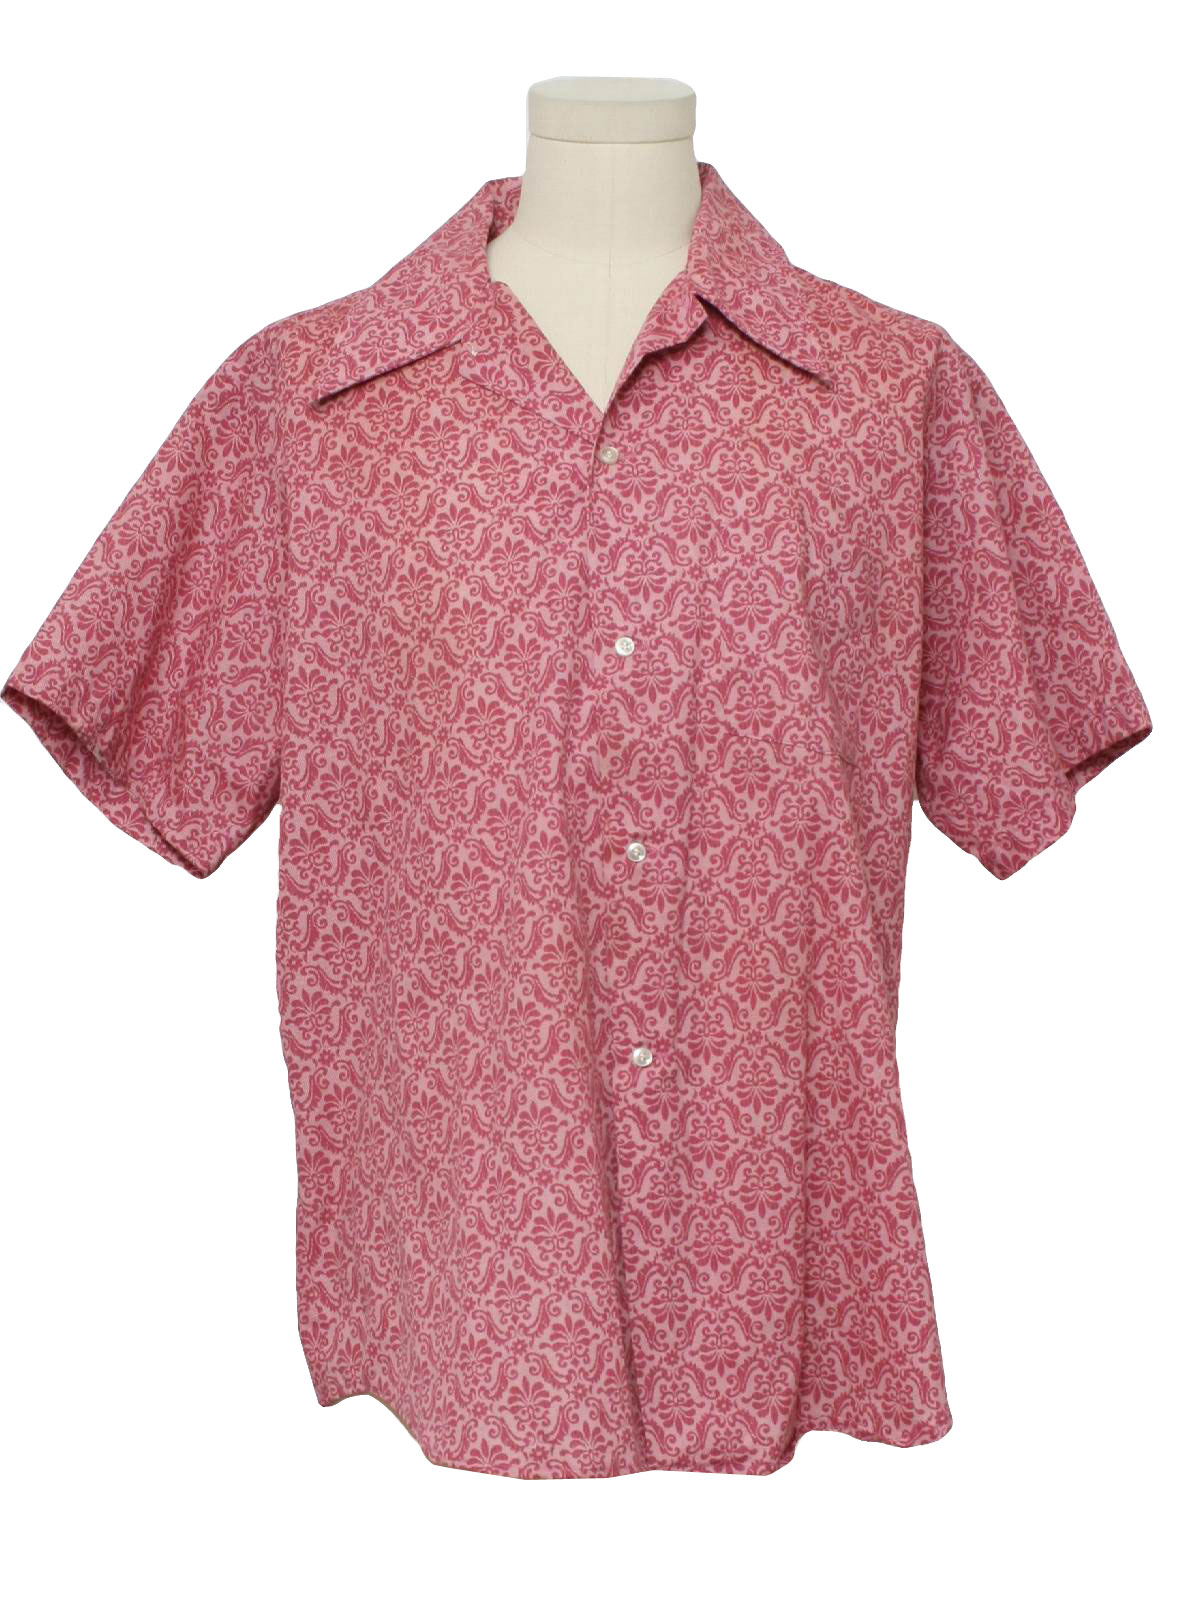 Vintage 1970's Print Disco Shirt: 70s -Kmart- Mens shaded rose and wine ...